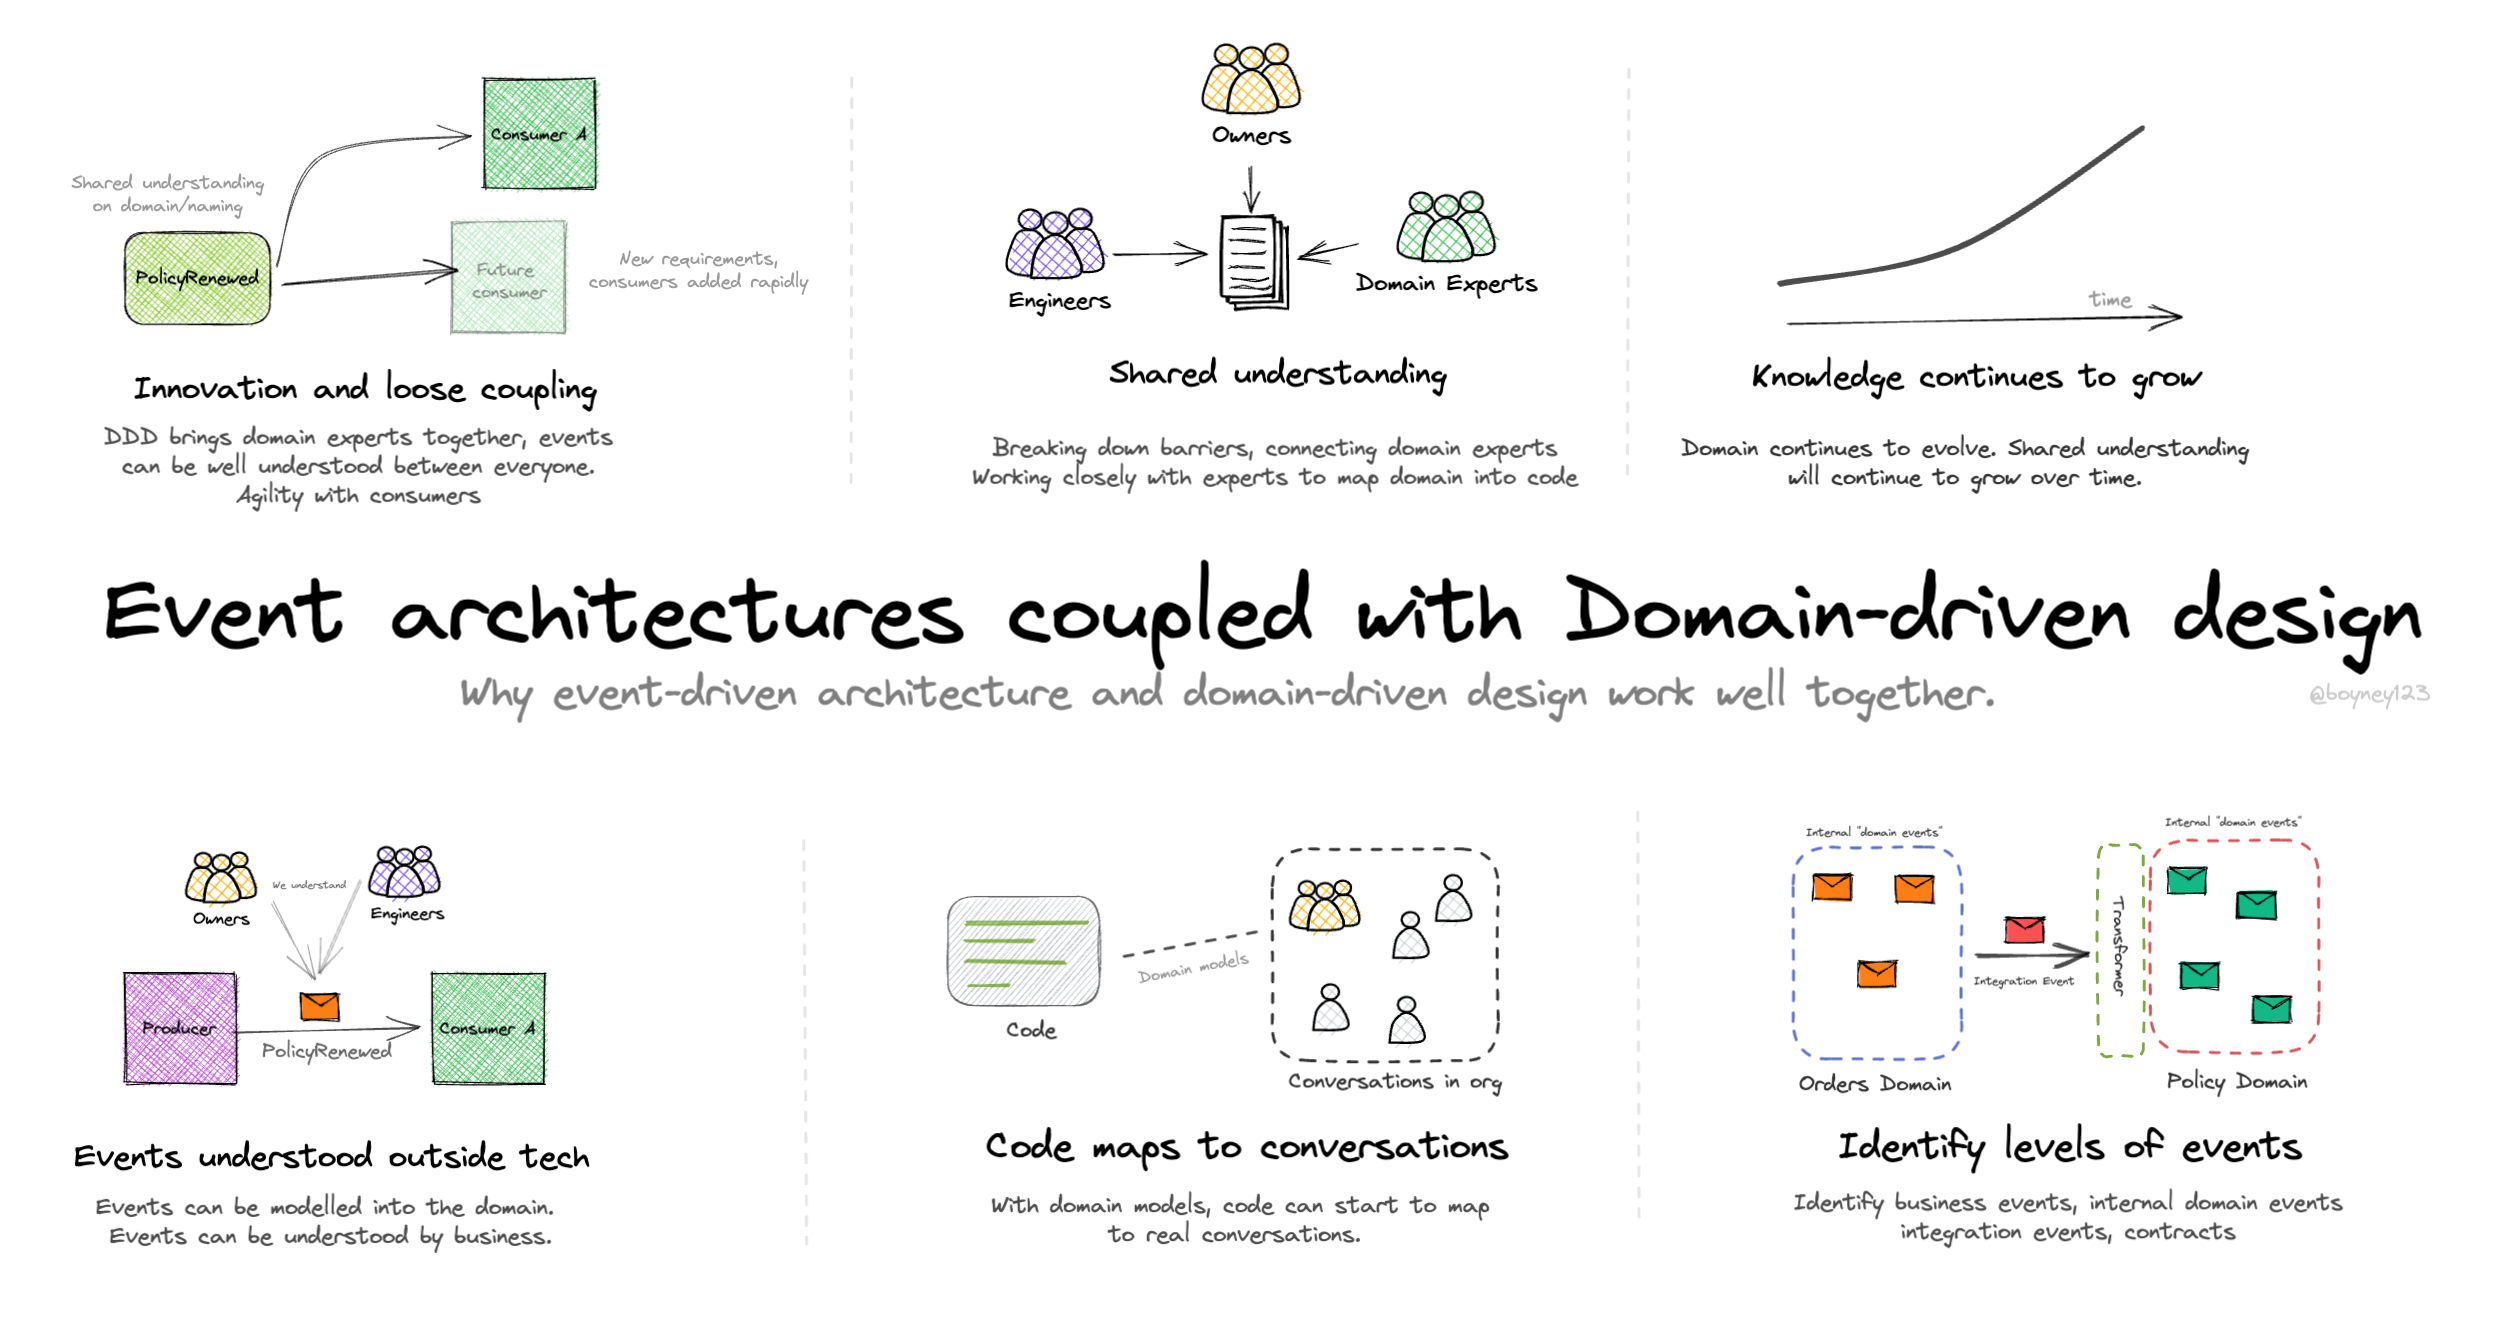 Event-driven architecture coupled with Domain-driven design